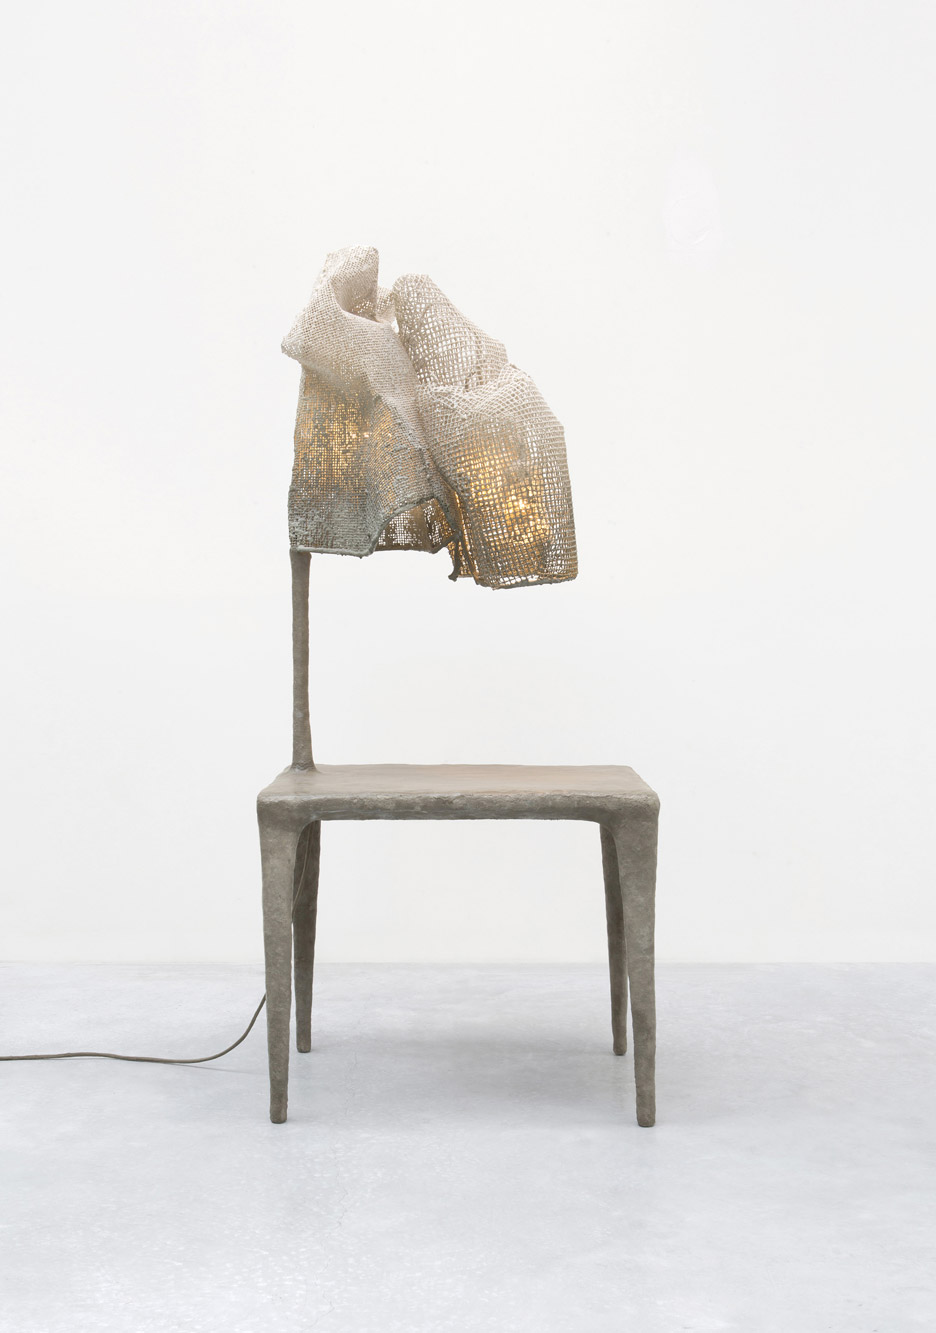 Light Mesh by Nacho Carbonell Carpenters Workshop, Gallery Exhibition London